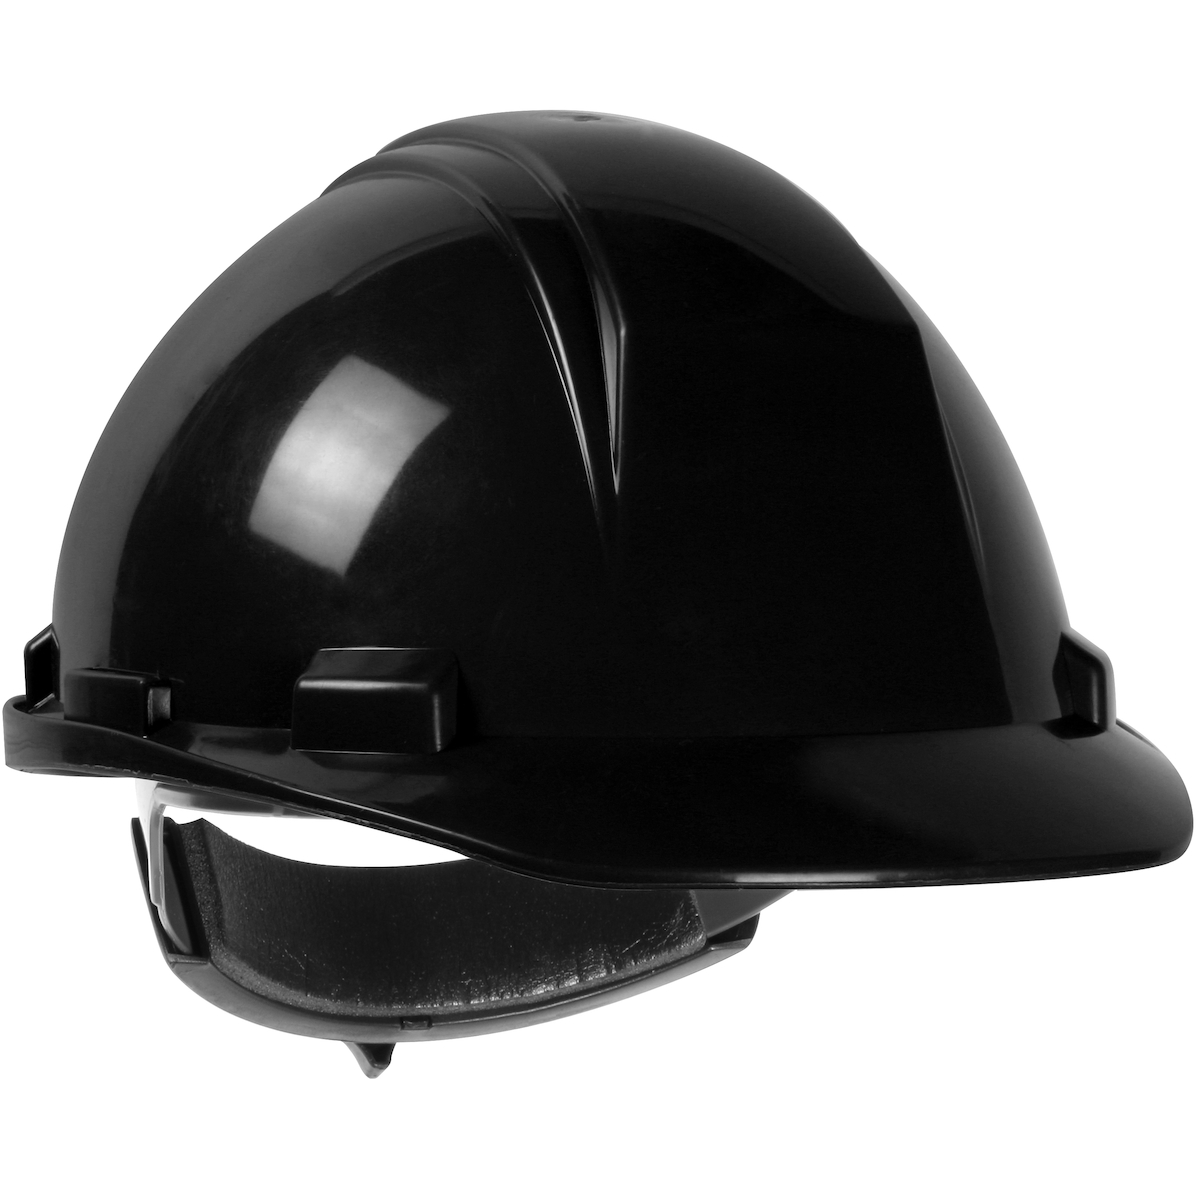 TYPE II, CAP STYLE HARD HAT WITH HDPE SHELL, 4-POINT TEXTILE SUSPENSION AND WHEEL RATCHET ADJUSTMENT